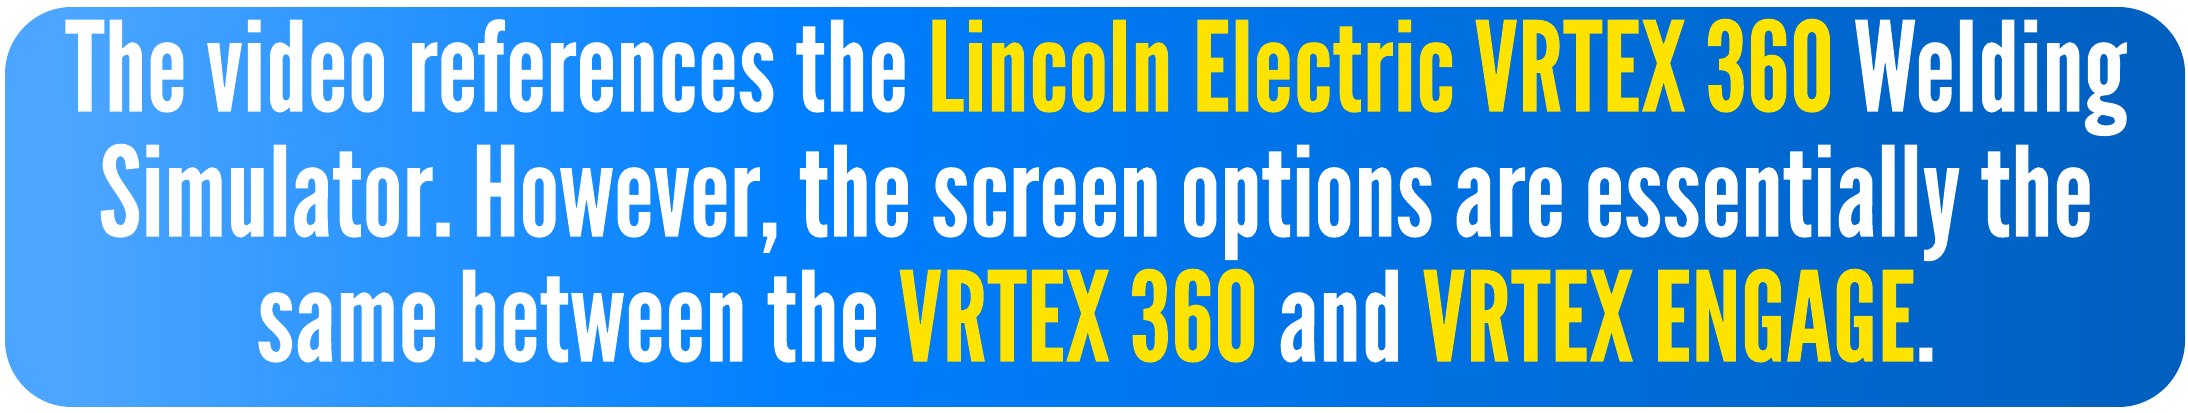 The video references the Lincoln Electric VRTEX 360 Welding Simulator. However, the screen options are essentially the same between the VRTEX 360 and VRTEX ENGAGE. 